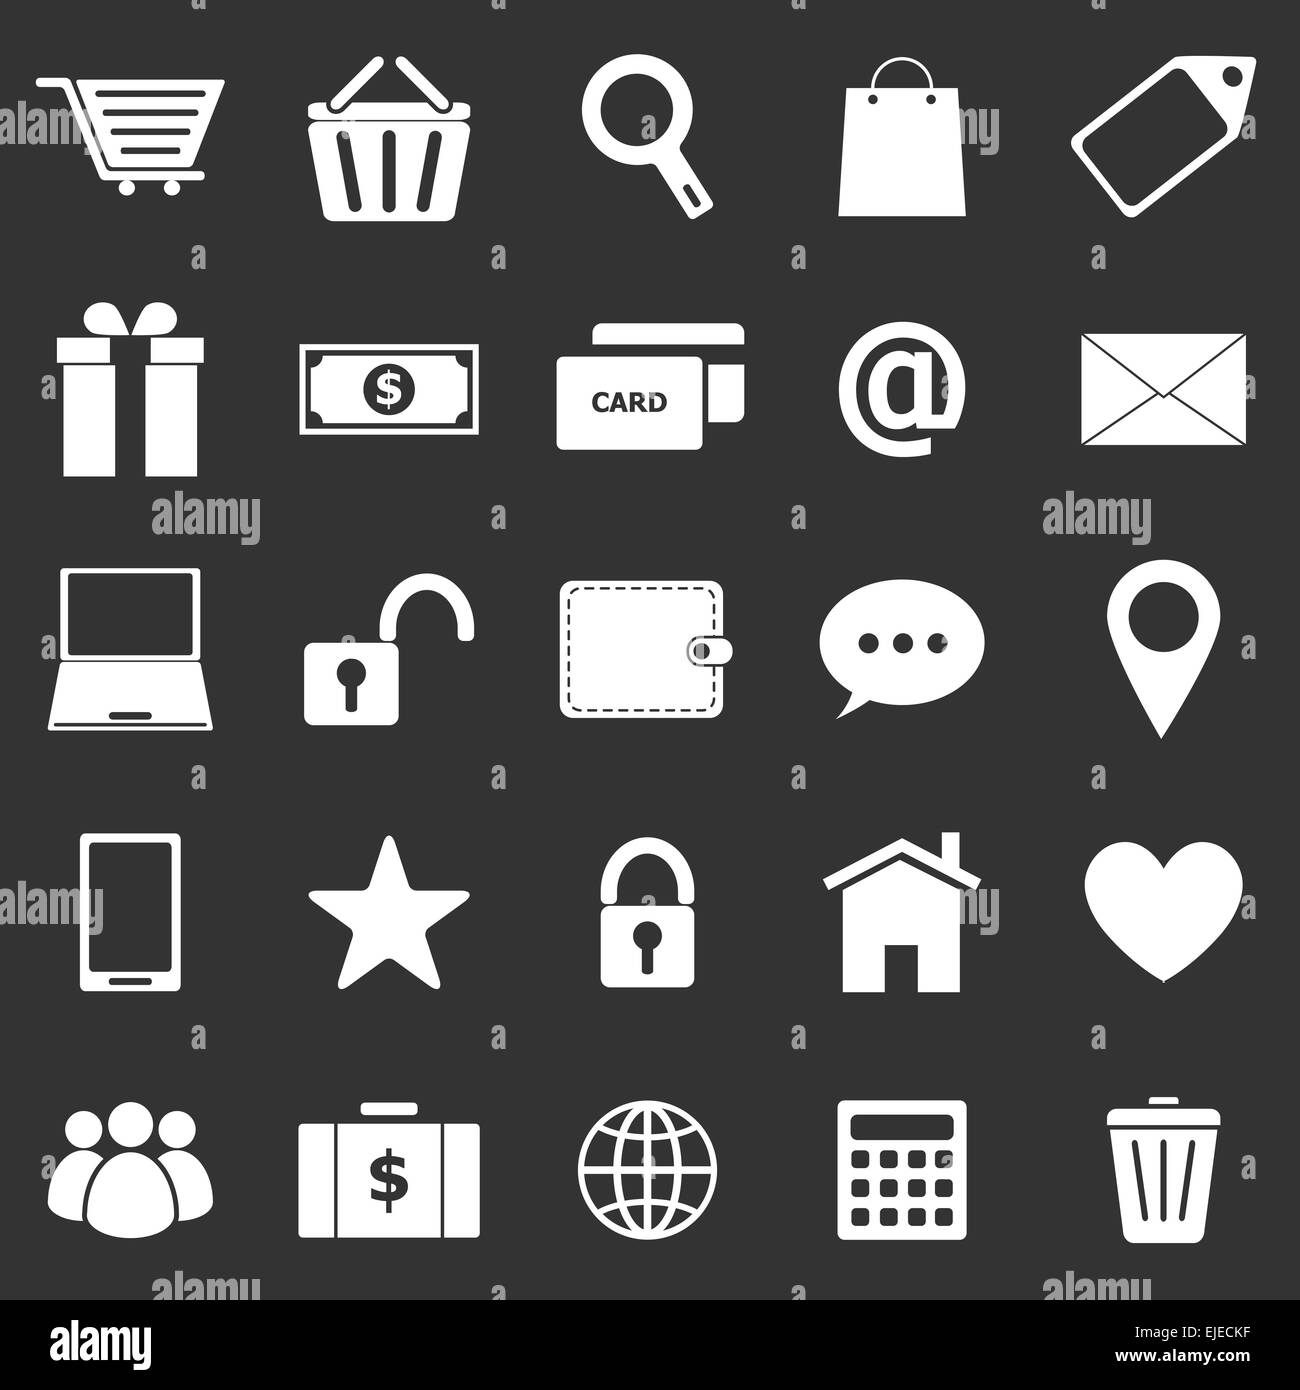 Ecommerce icons on black background, stock vector Stock Vector